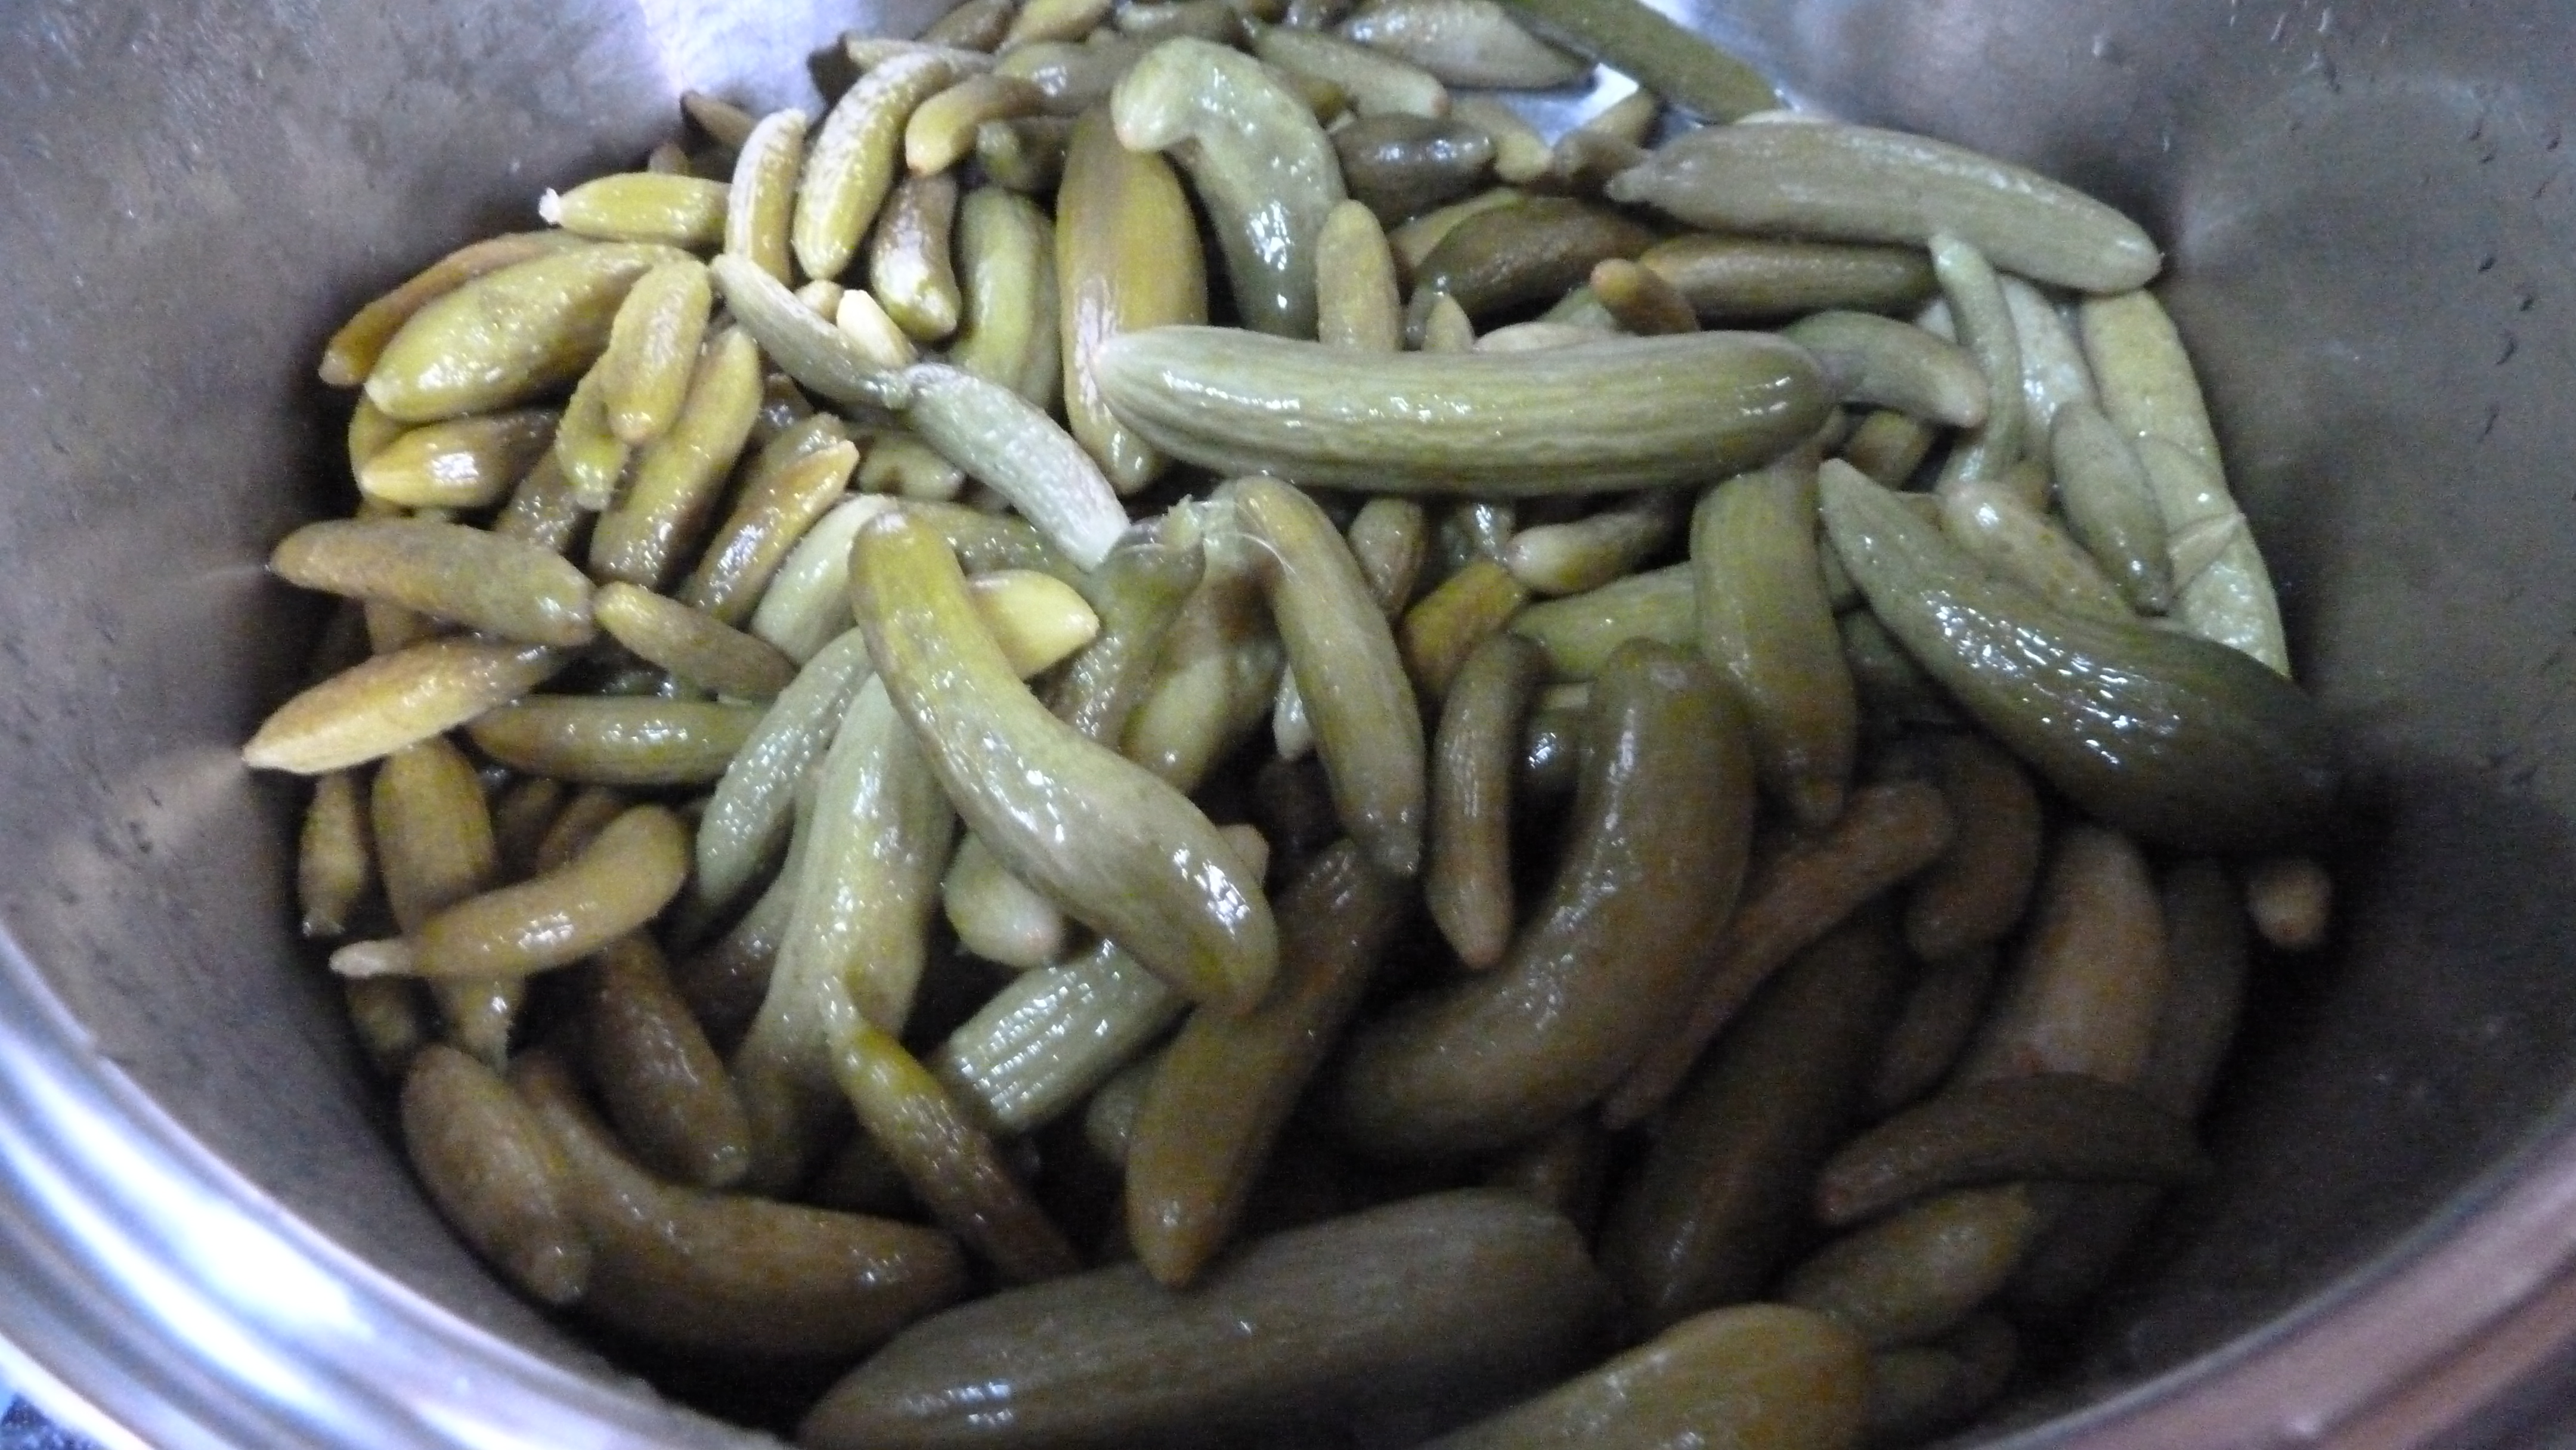 Sherry reccomend Recipe for sweet gherkin midget pickles